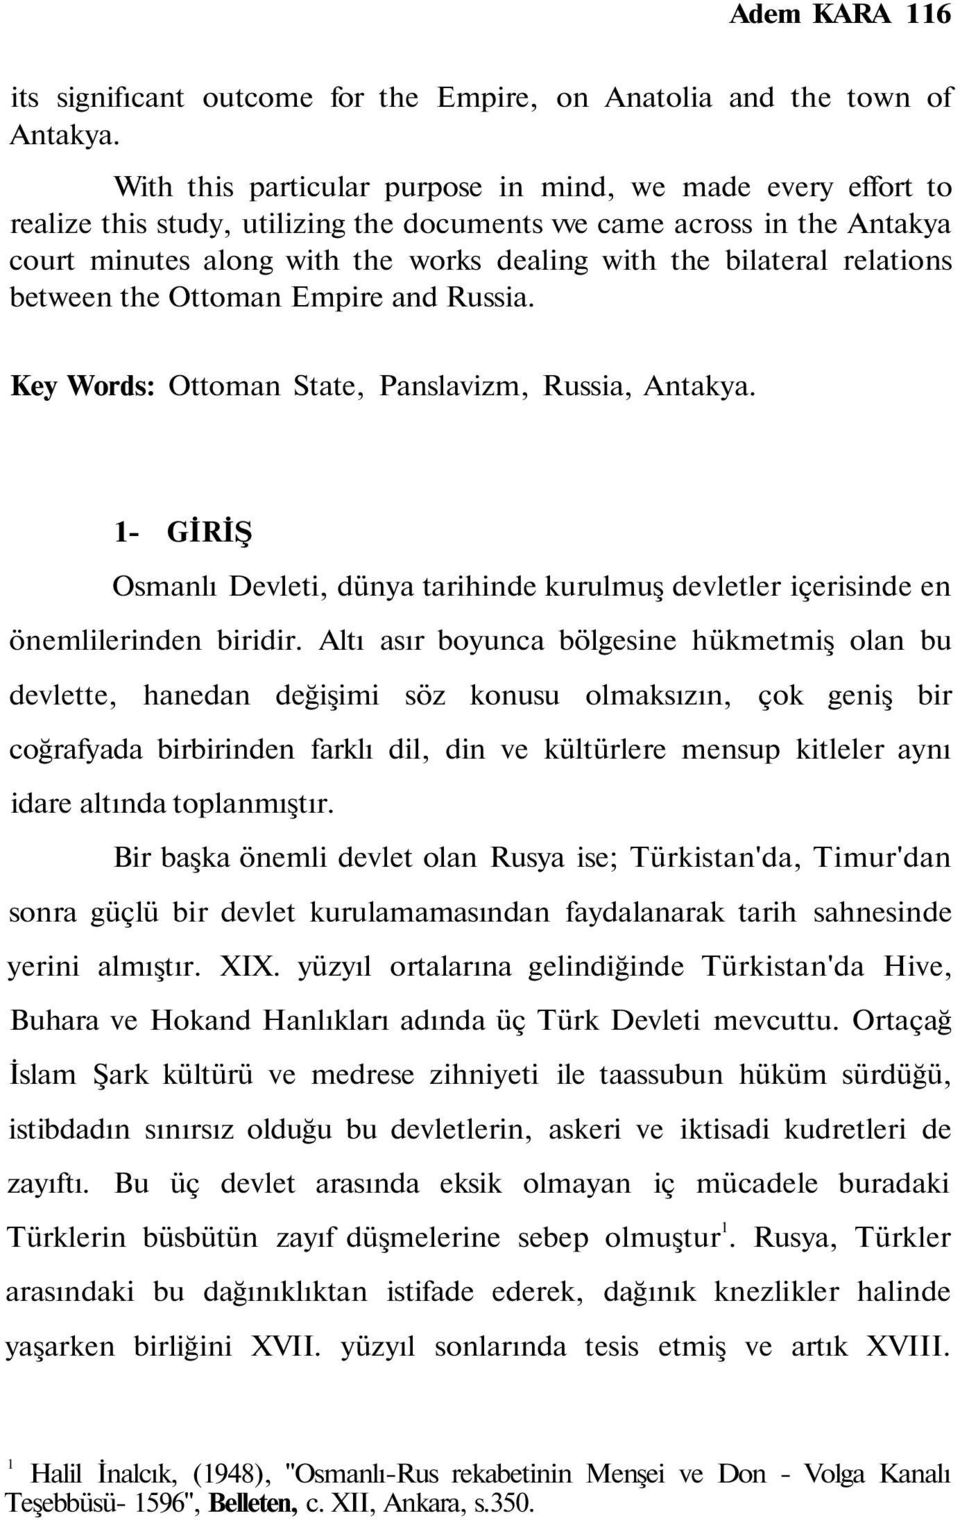 relations between the Ottoman Empire and Russia. Key Words: Ottoman State, Panslavizm, Russia, Antakya.